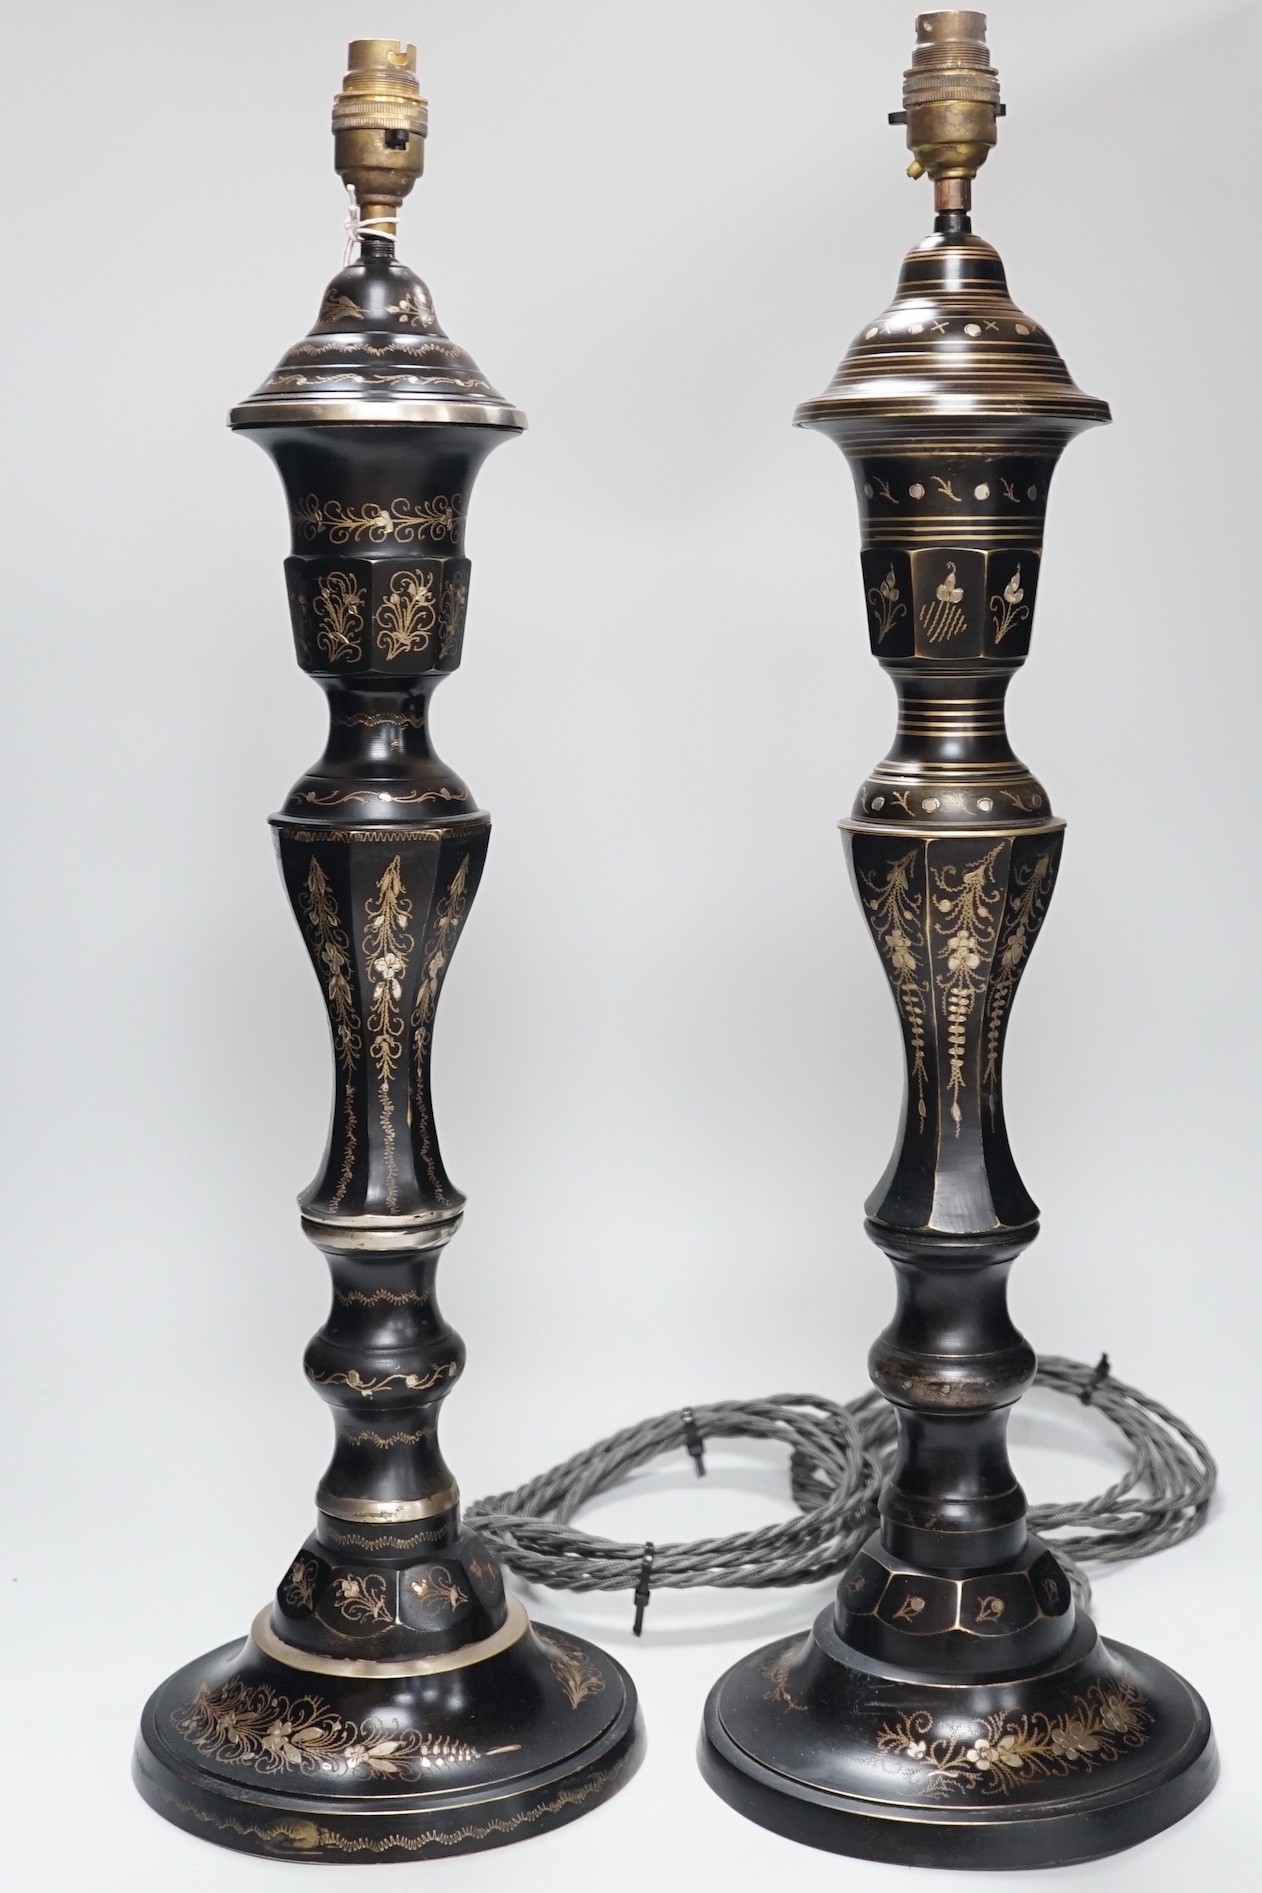 A near pair of Indian Bidri ware table lamps, 60cm total height